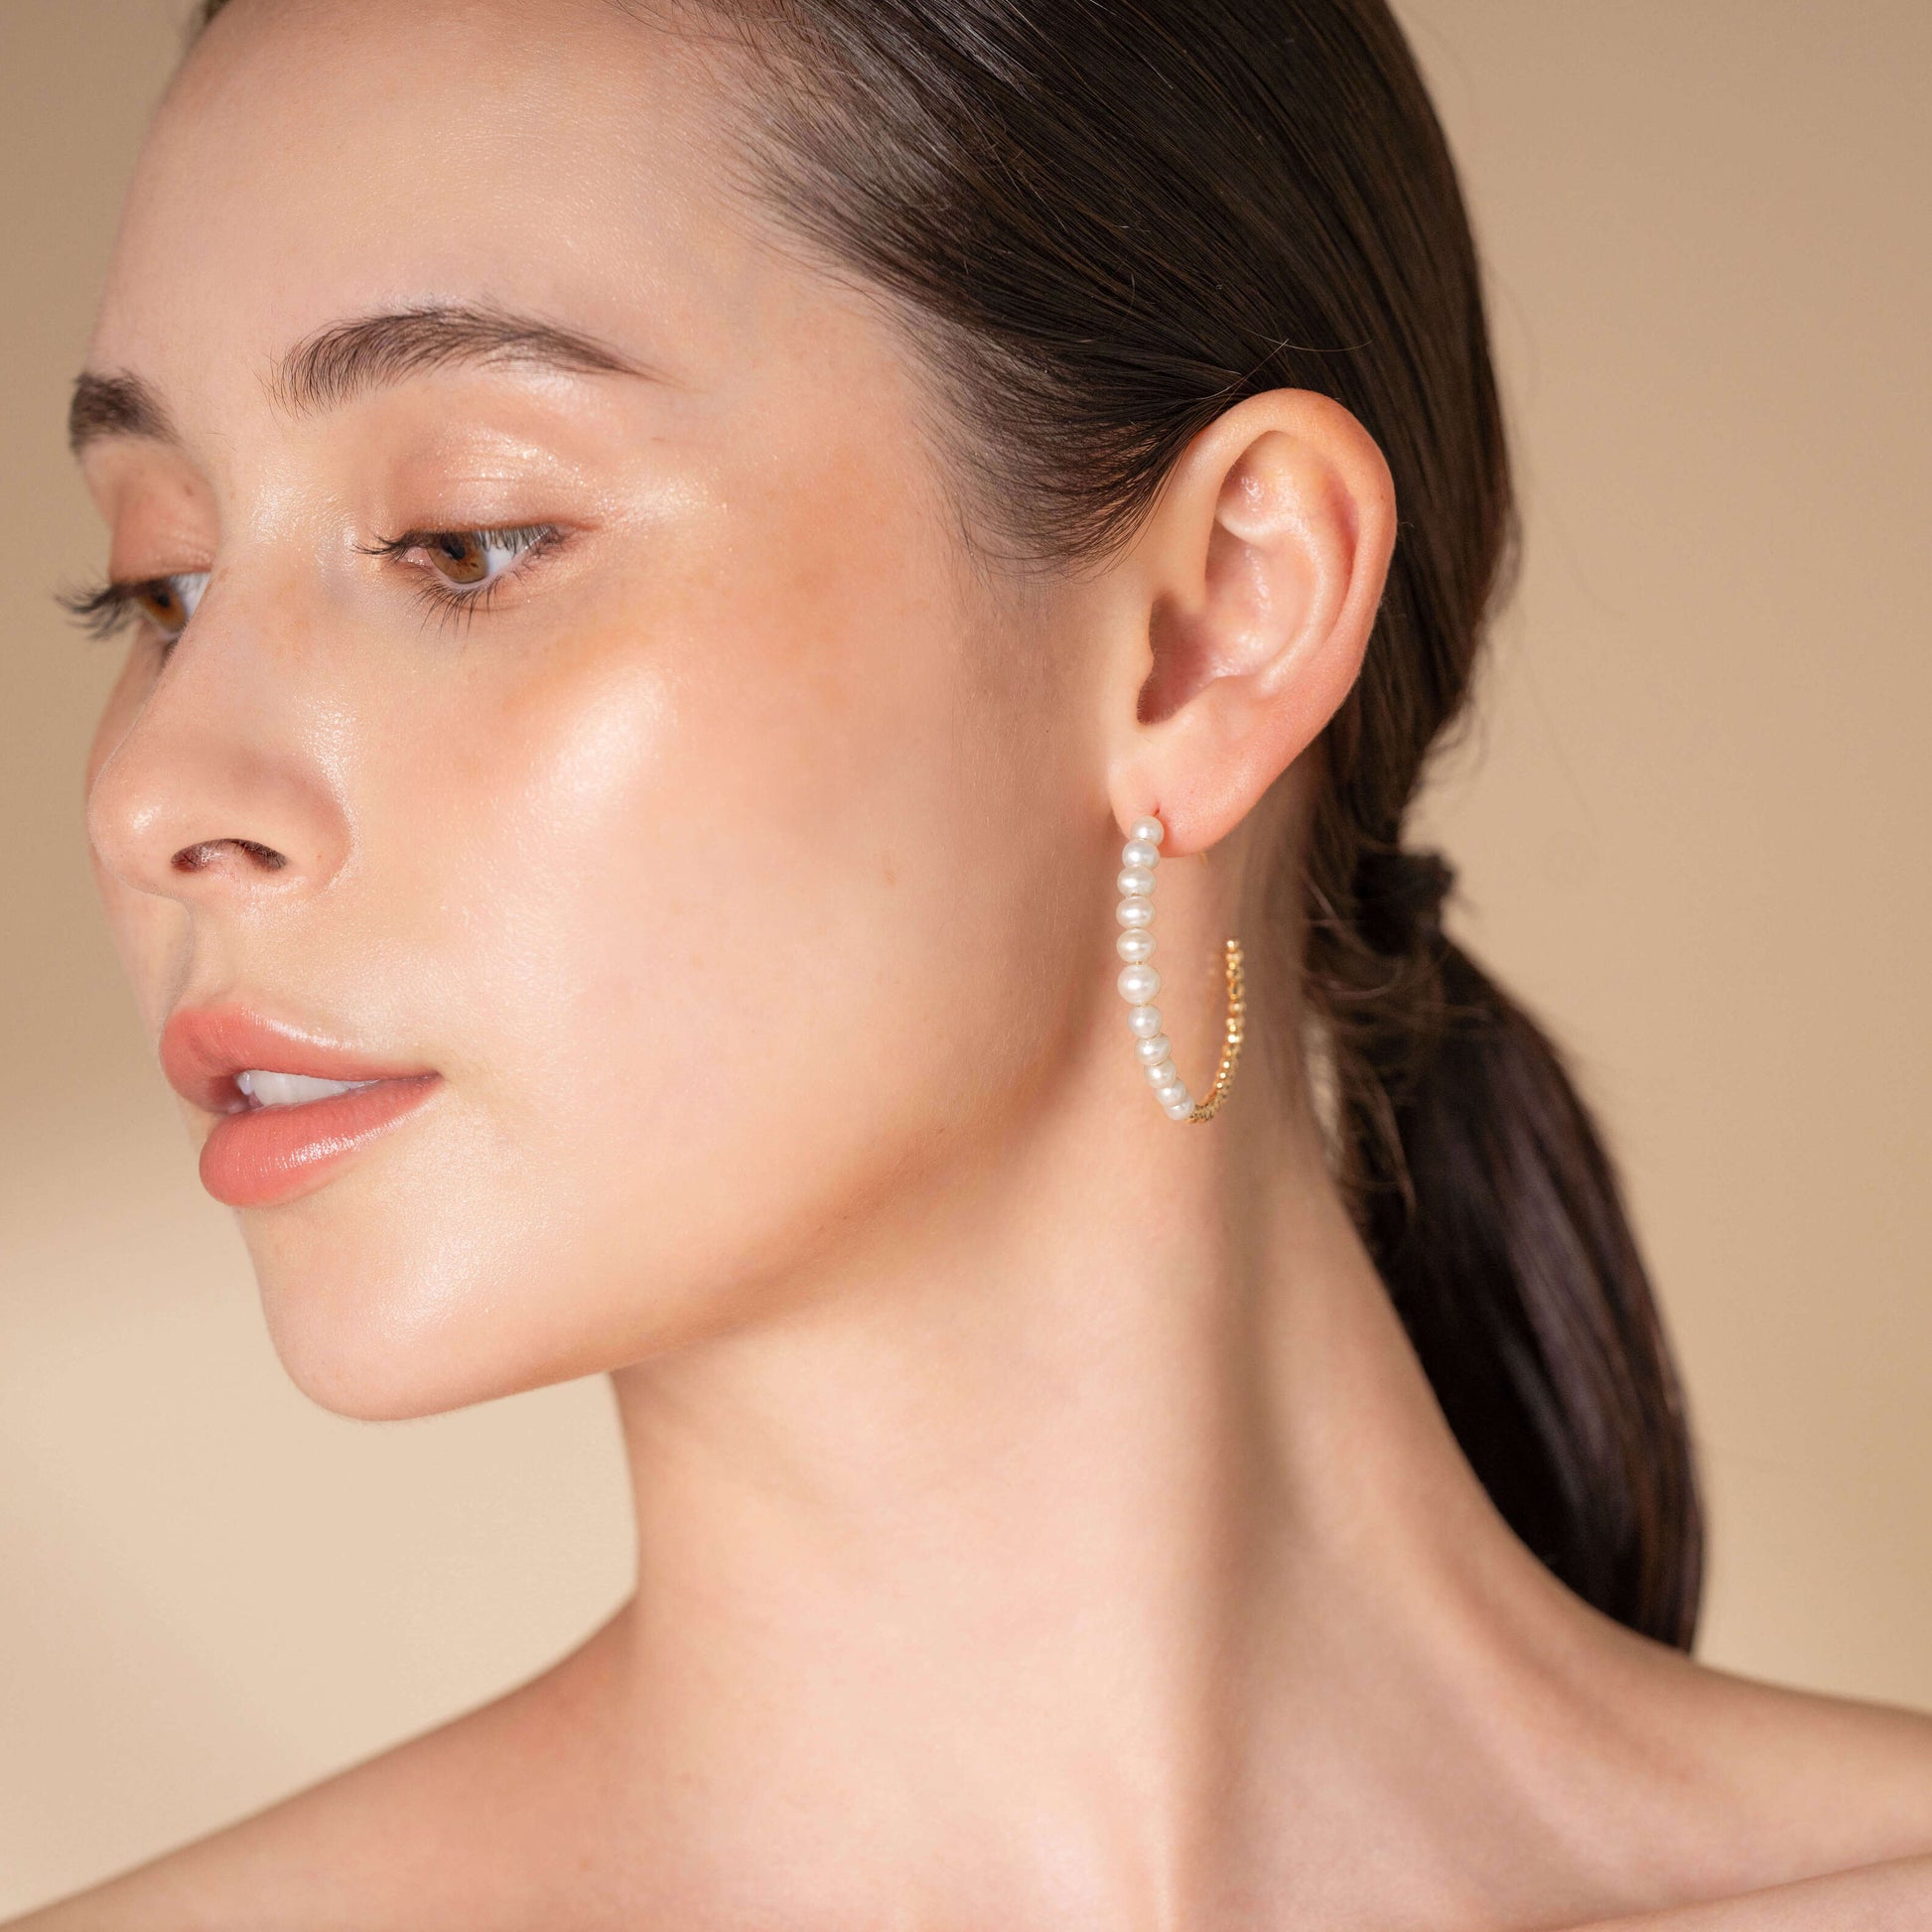 Chic woman in white top accessorized with Mirror Gold x Pearl Hoop Pierce earrings.